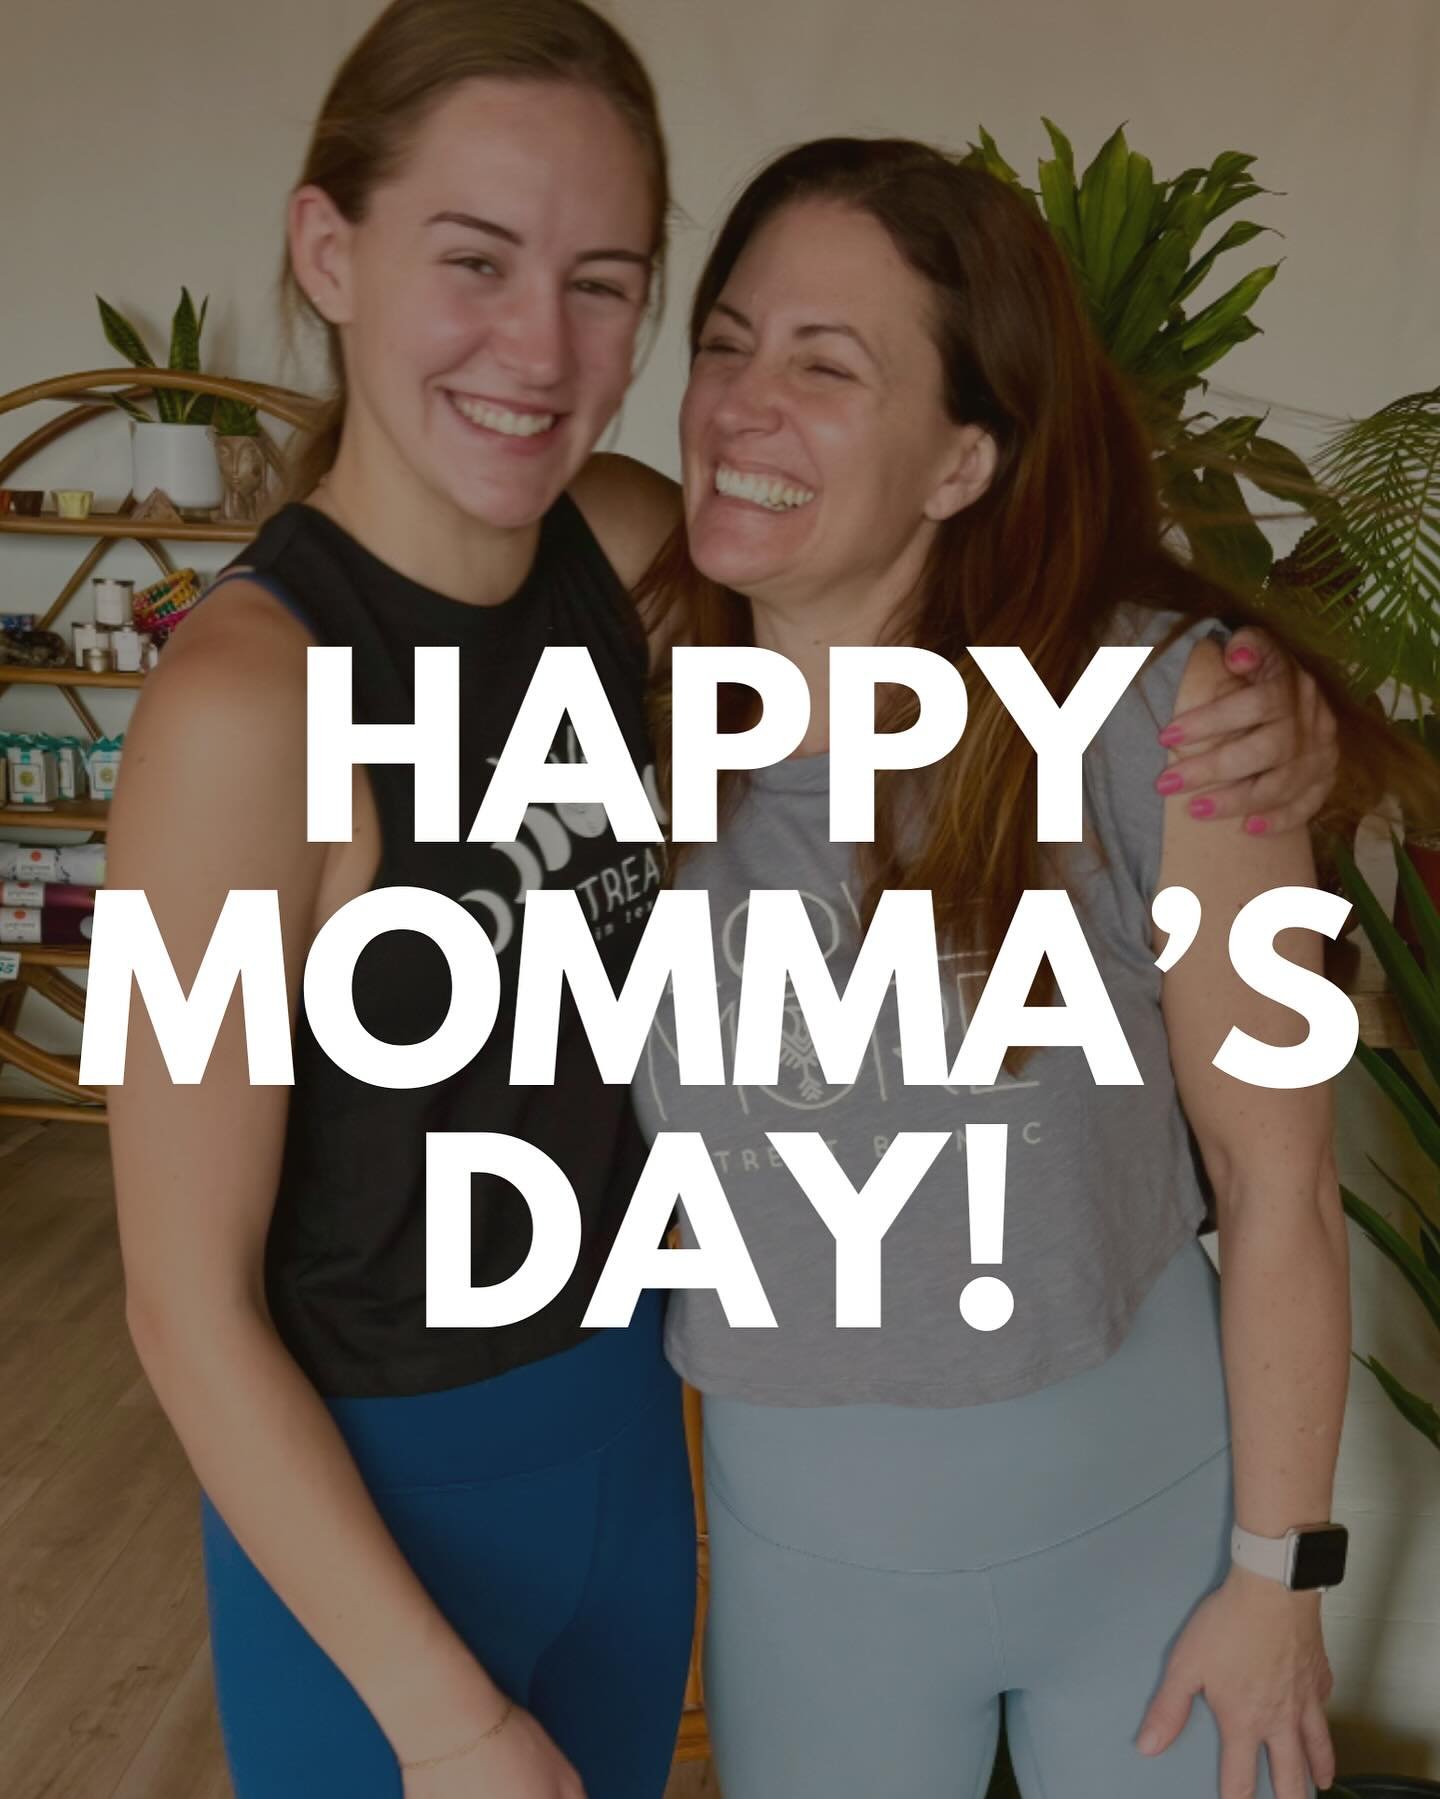 Happy Momma&rsquo;s Day to all the Mommas in the Retreat community! Y&rsquo;all are amazing, strong, beautiful and oh so sweet&hellip; and we&rsquo;re so happy to be doing life with all of you! 🌸🌸🌸

We hope you can stop by the studio for a class t